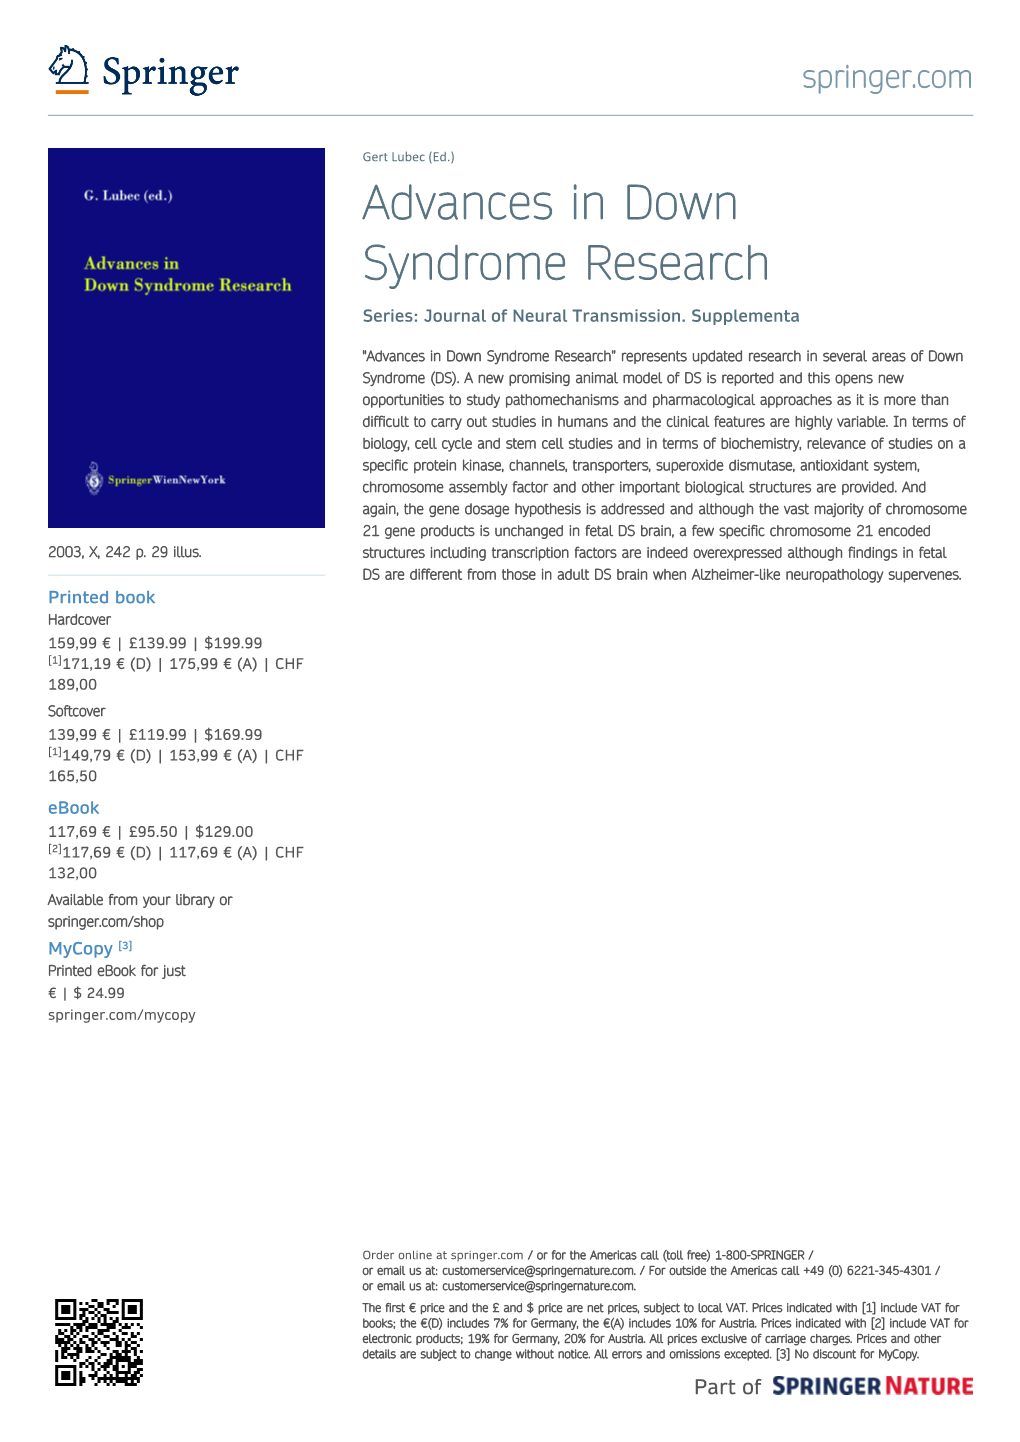 Advances in Down Syndrome Research Series: Journal of Neural Transmission